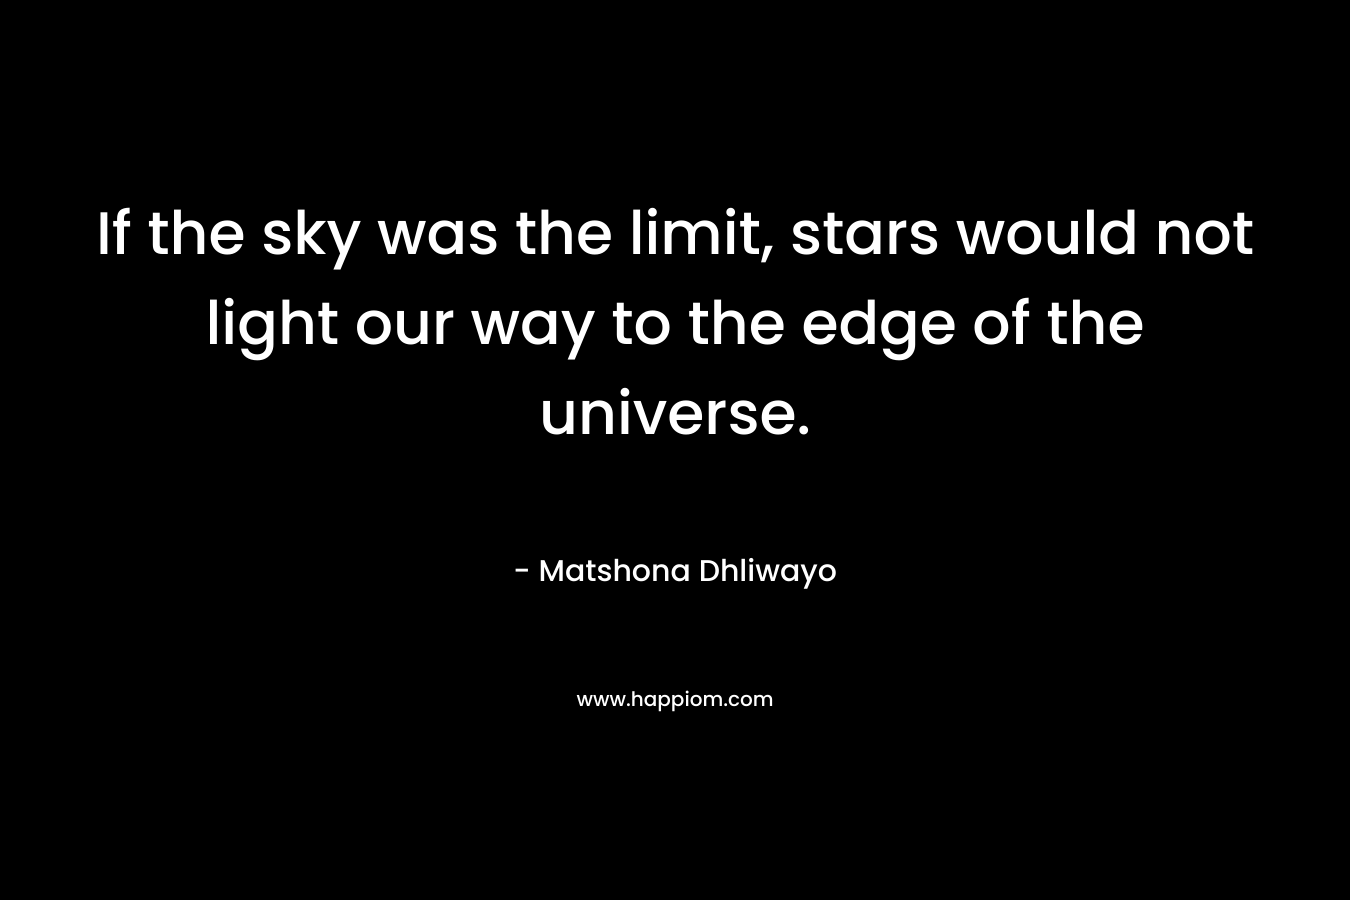 If the sky was the limit, stars would not light our way to the edge of the universe.